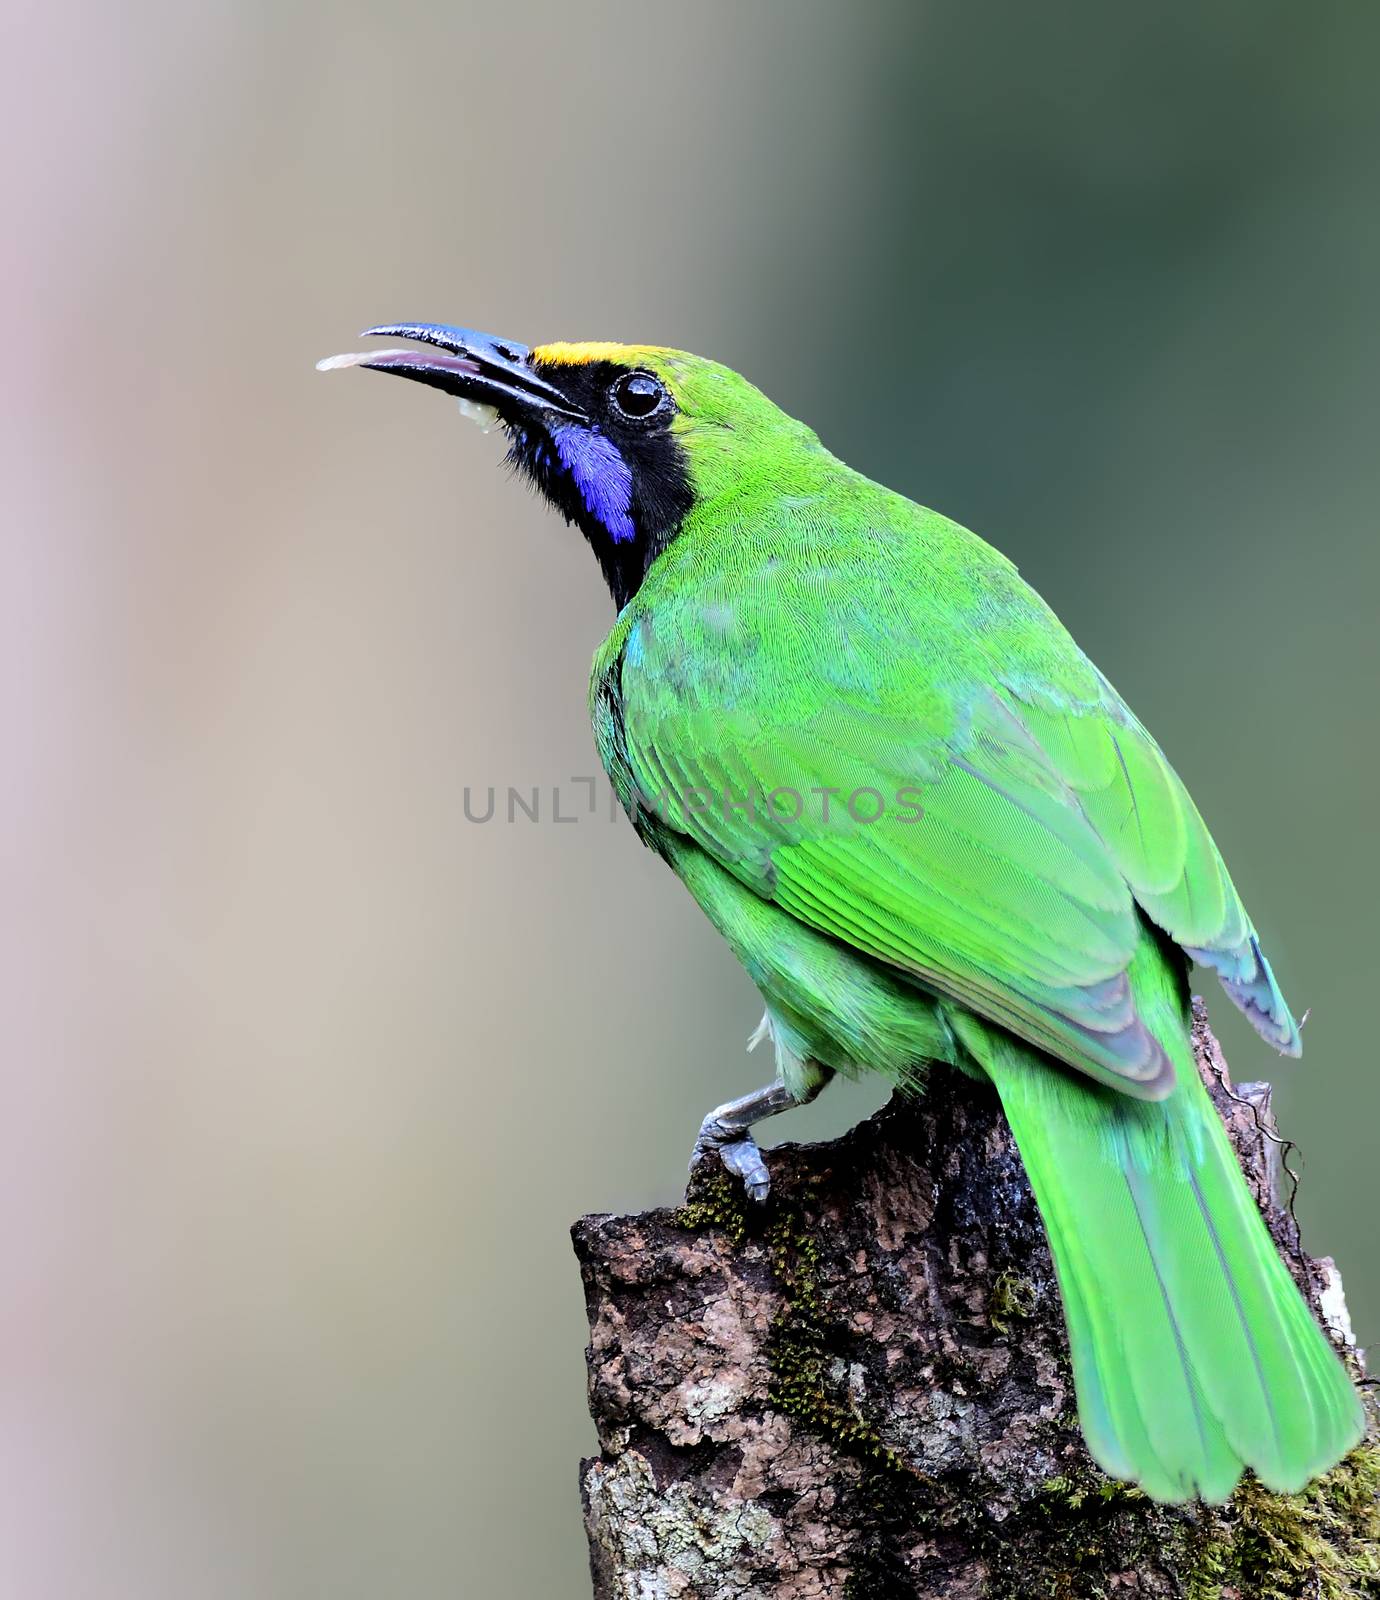 The golden-fronted leafbird is a species of leafbird. It is found from the Indian subcontinent and south-western China, to south-east Asia and Sumatra.